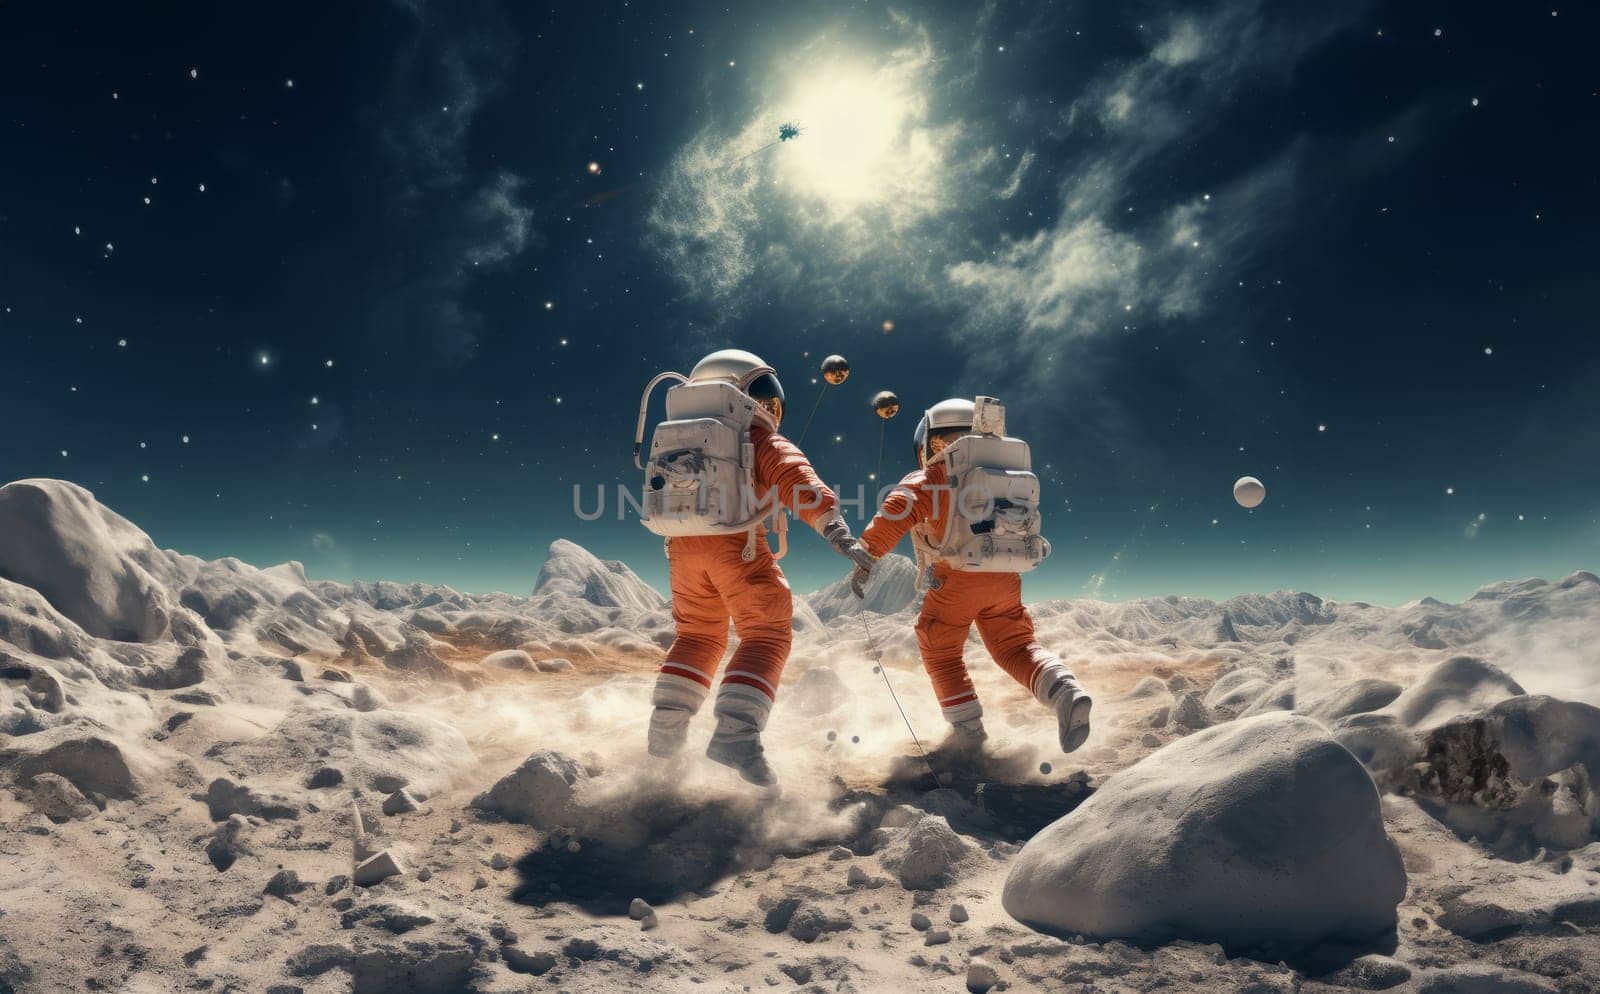 a group of friends revels in cosmic joy, creating unforgettable memories as they play and laugh together on the surreal surface of the moon, embodying the spirit of extraterrestrial camaraderie and lunar exploration.